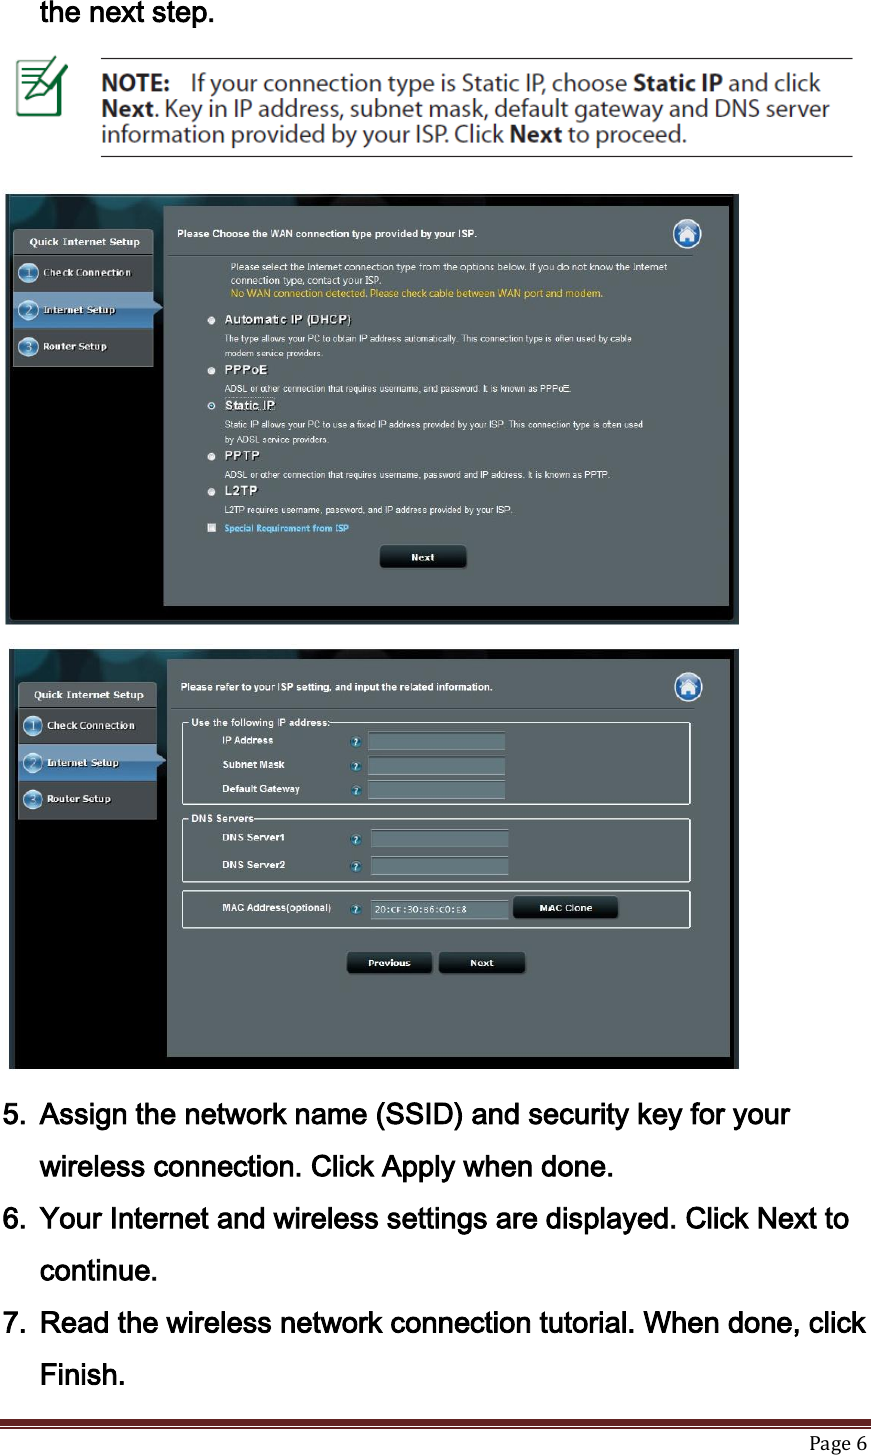   Page 6  the next step.    5. Assign the network name (SSID) and security key for your wireless connection. Click Apply when done. 6. Your Internet and wireless settings are displayed. Click Next to continue. 7. Read the wireless network connection tutorial. When done, click Finish. 